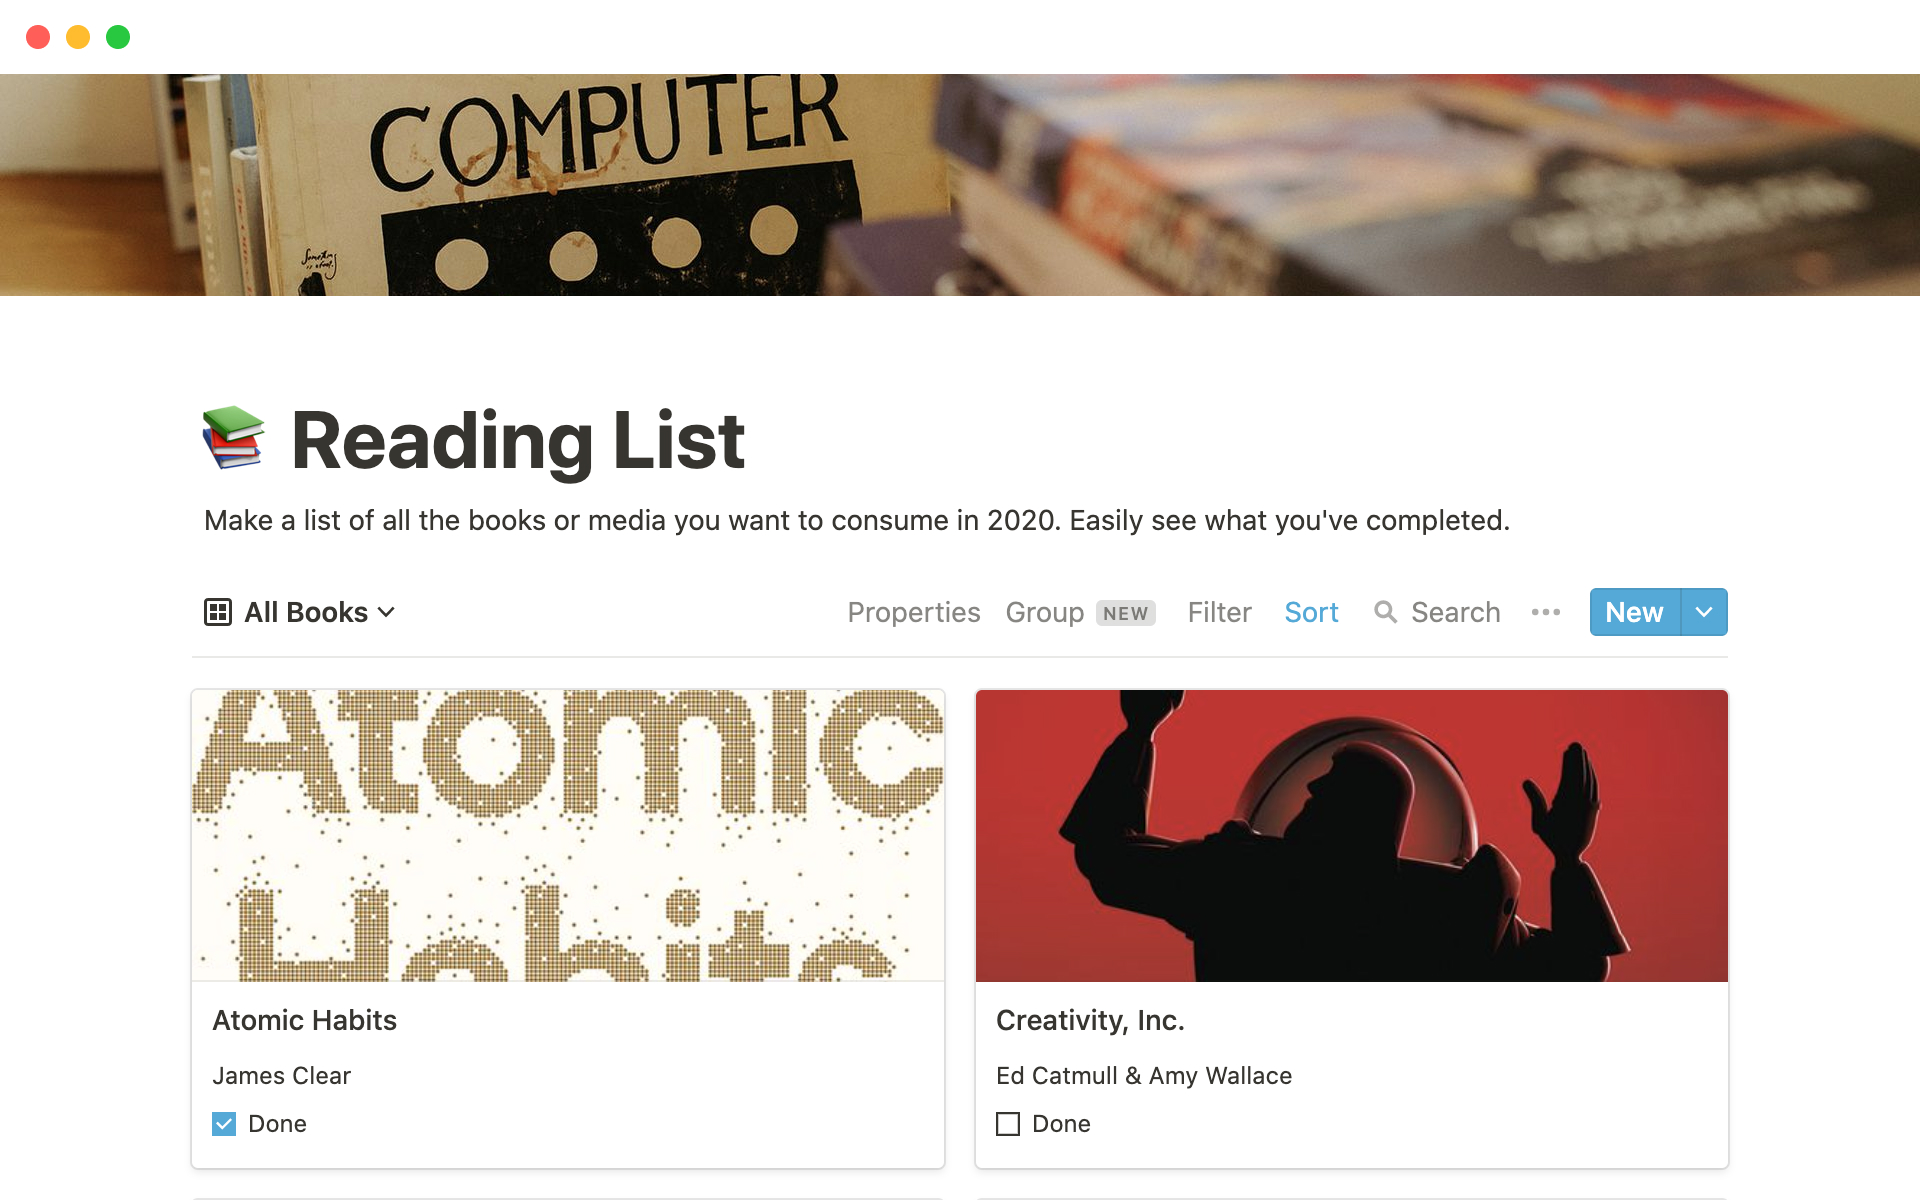 Make a list of all the books or media you want to consume. Easily see what you've completed.